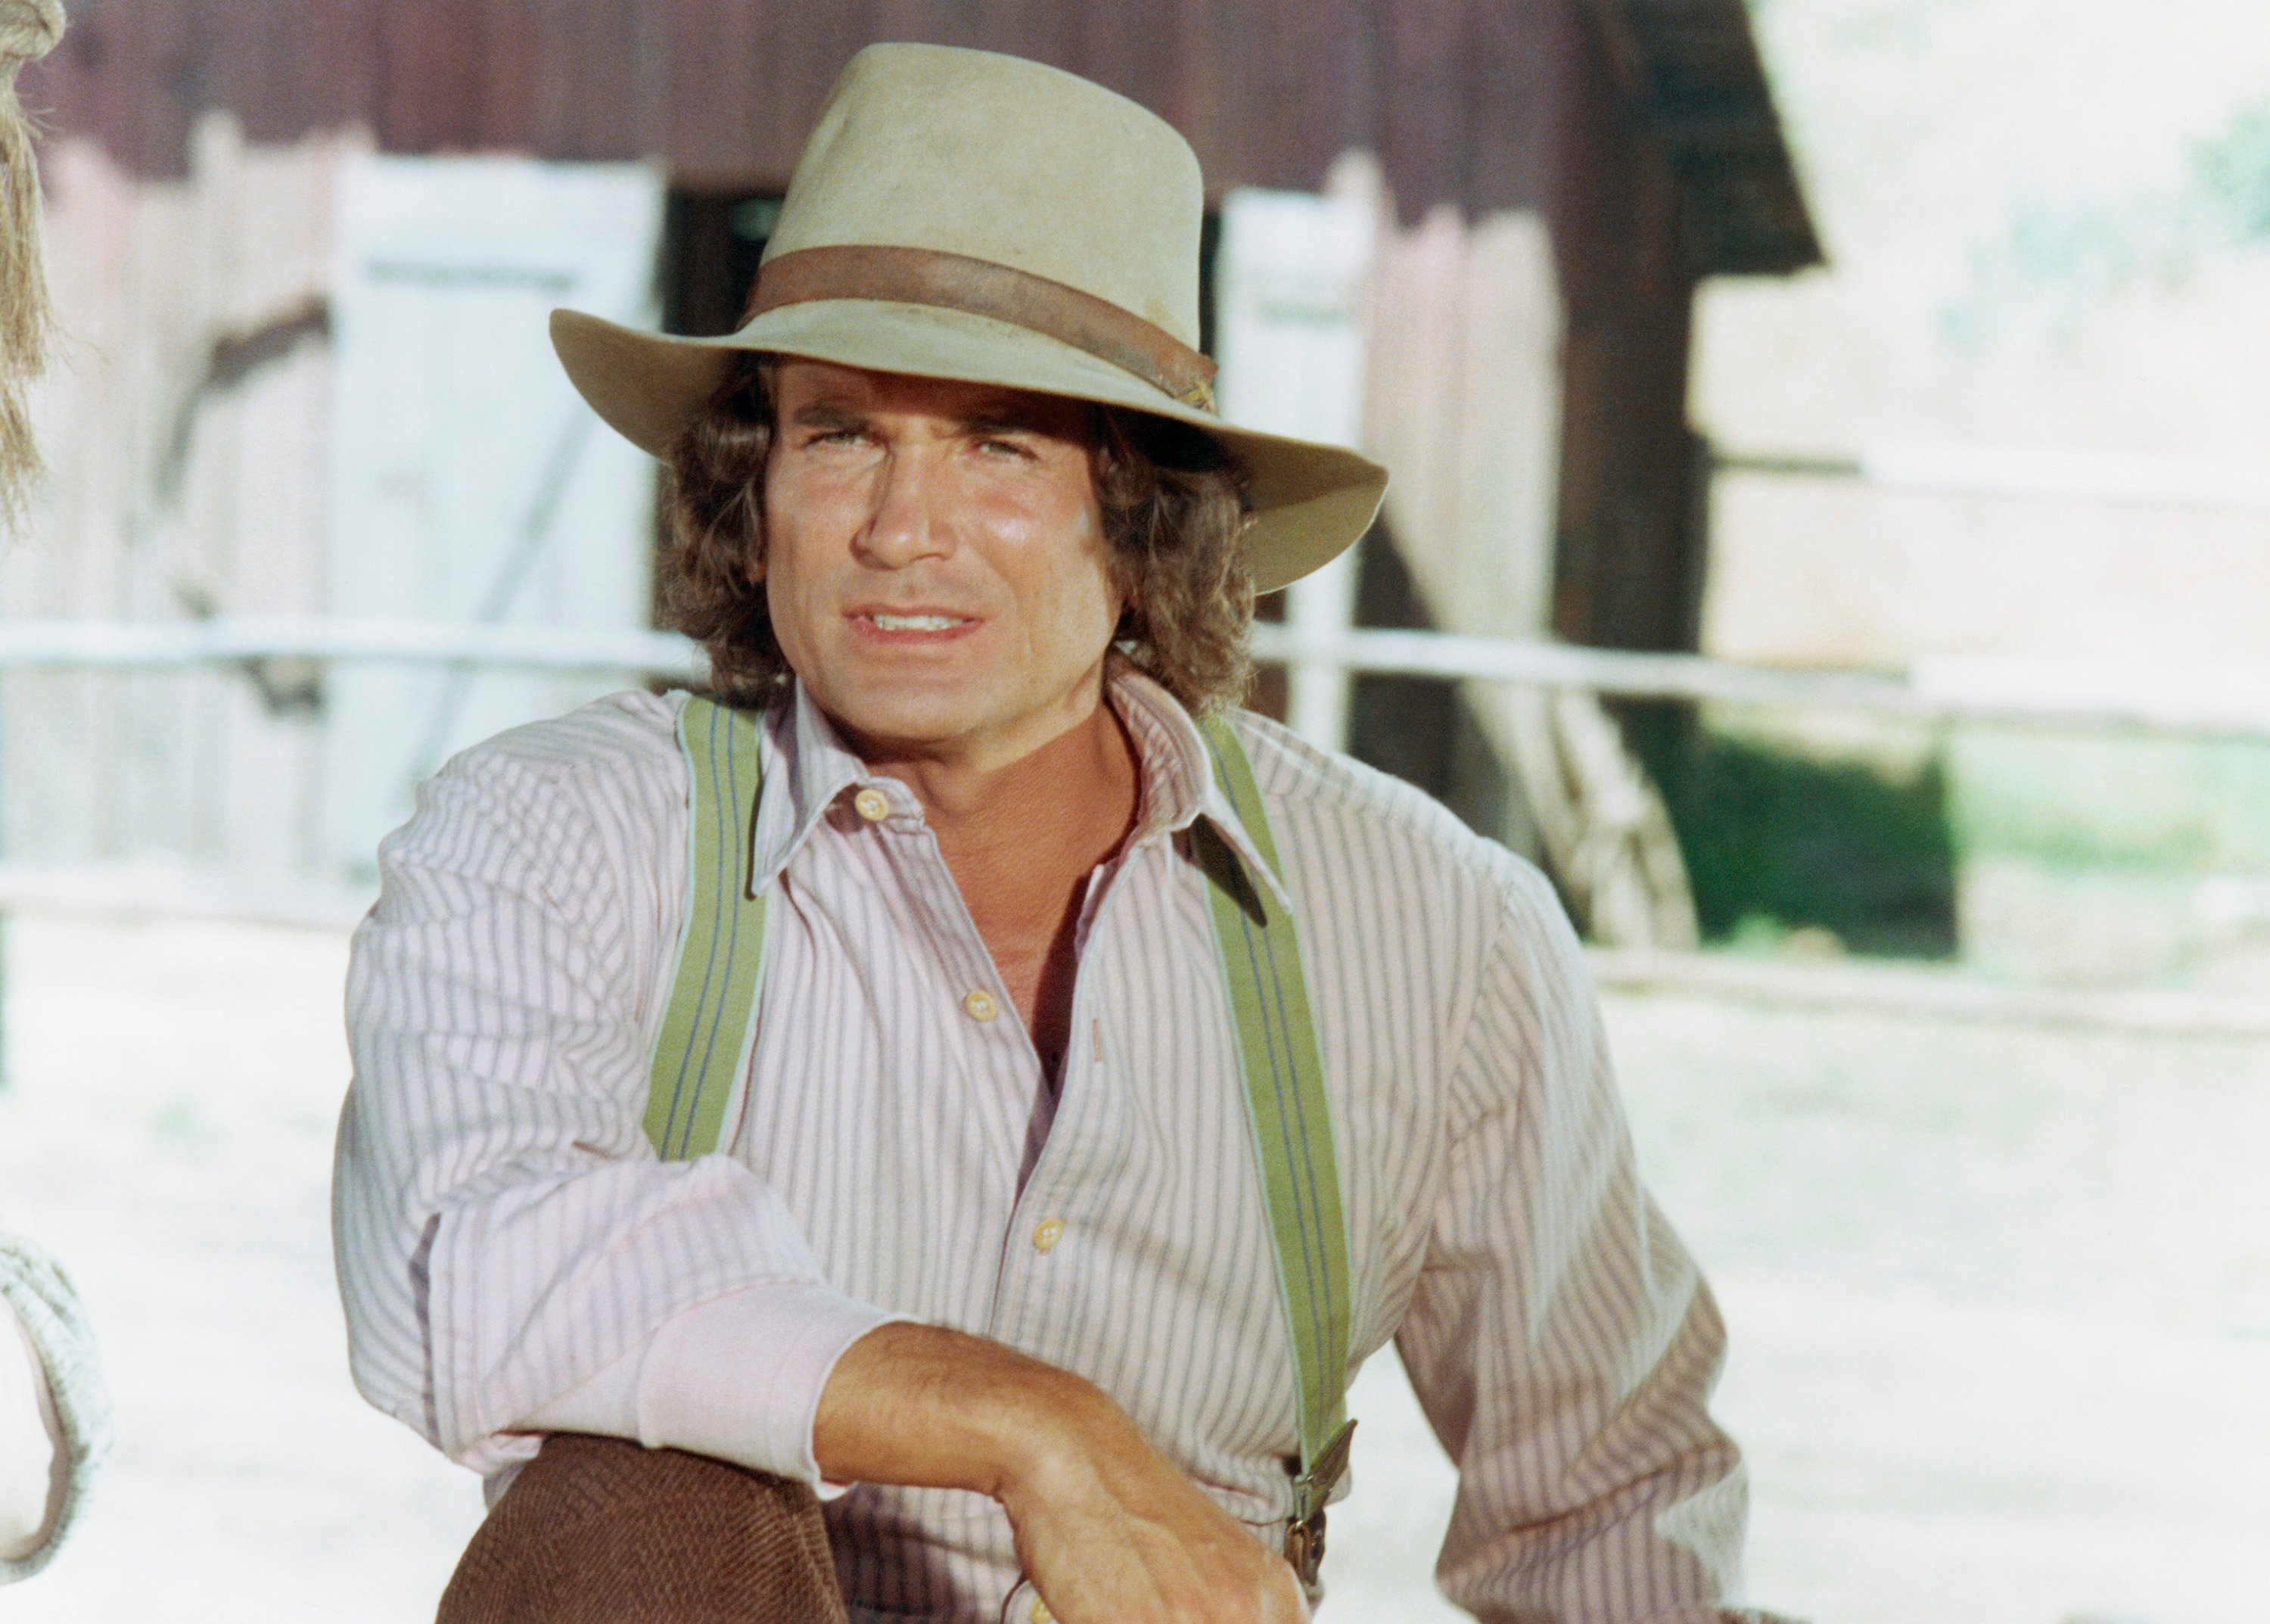 Michael Landon as Charles Ingalls on Little House on the Prairie